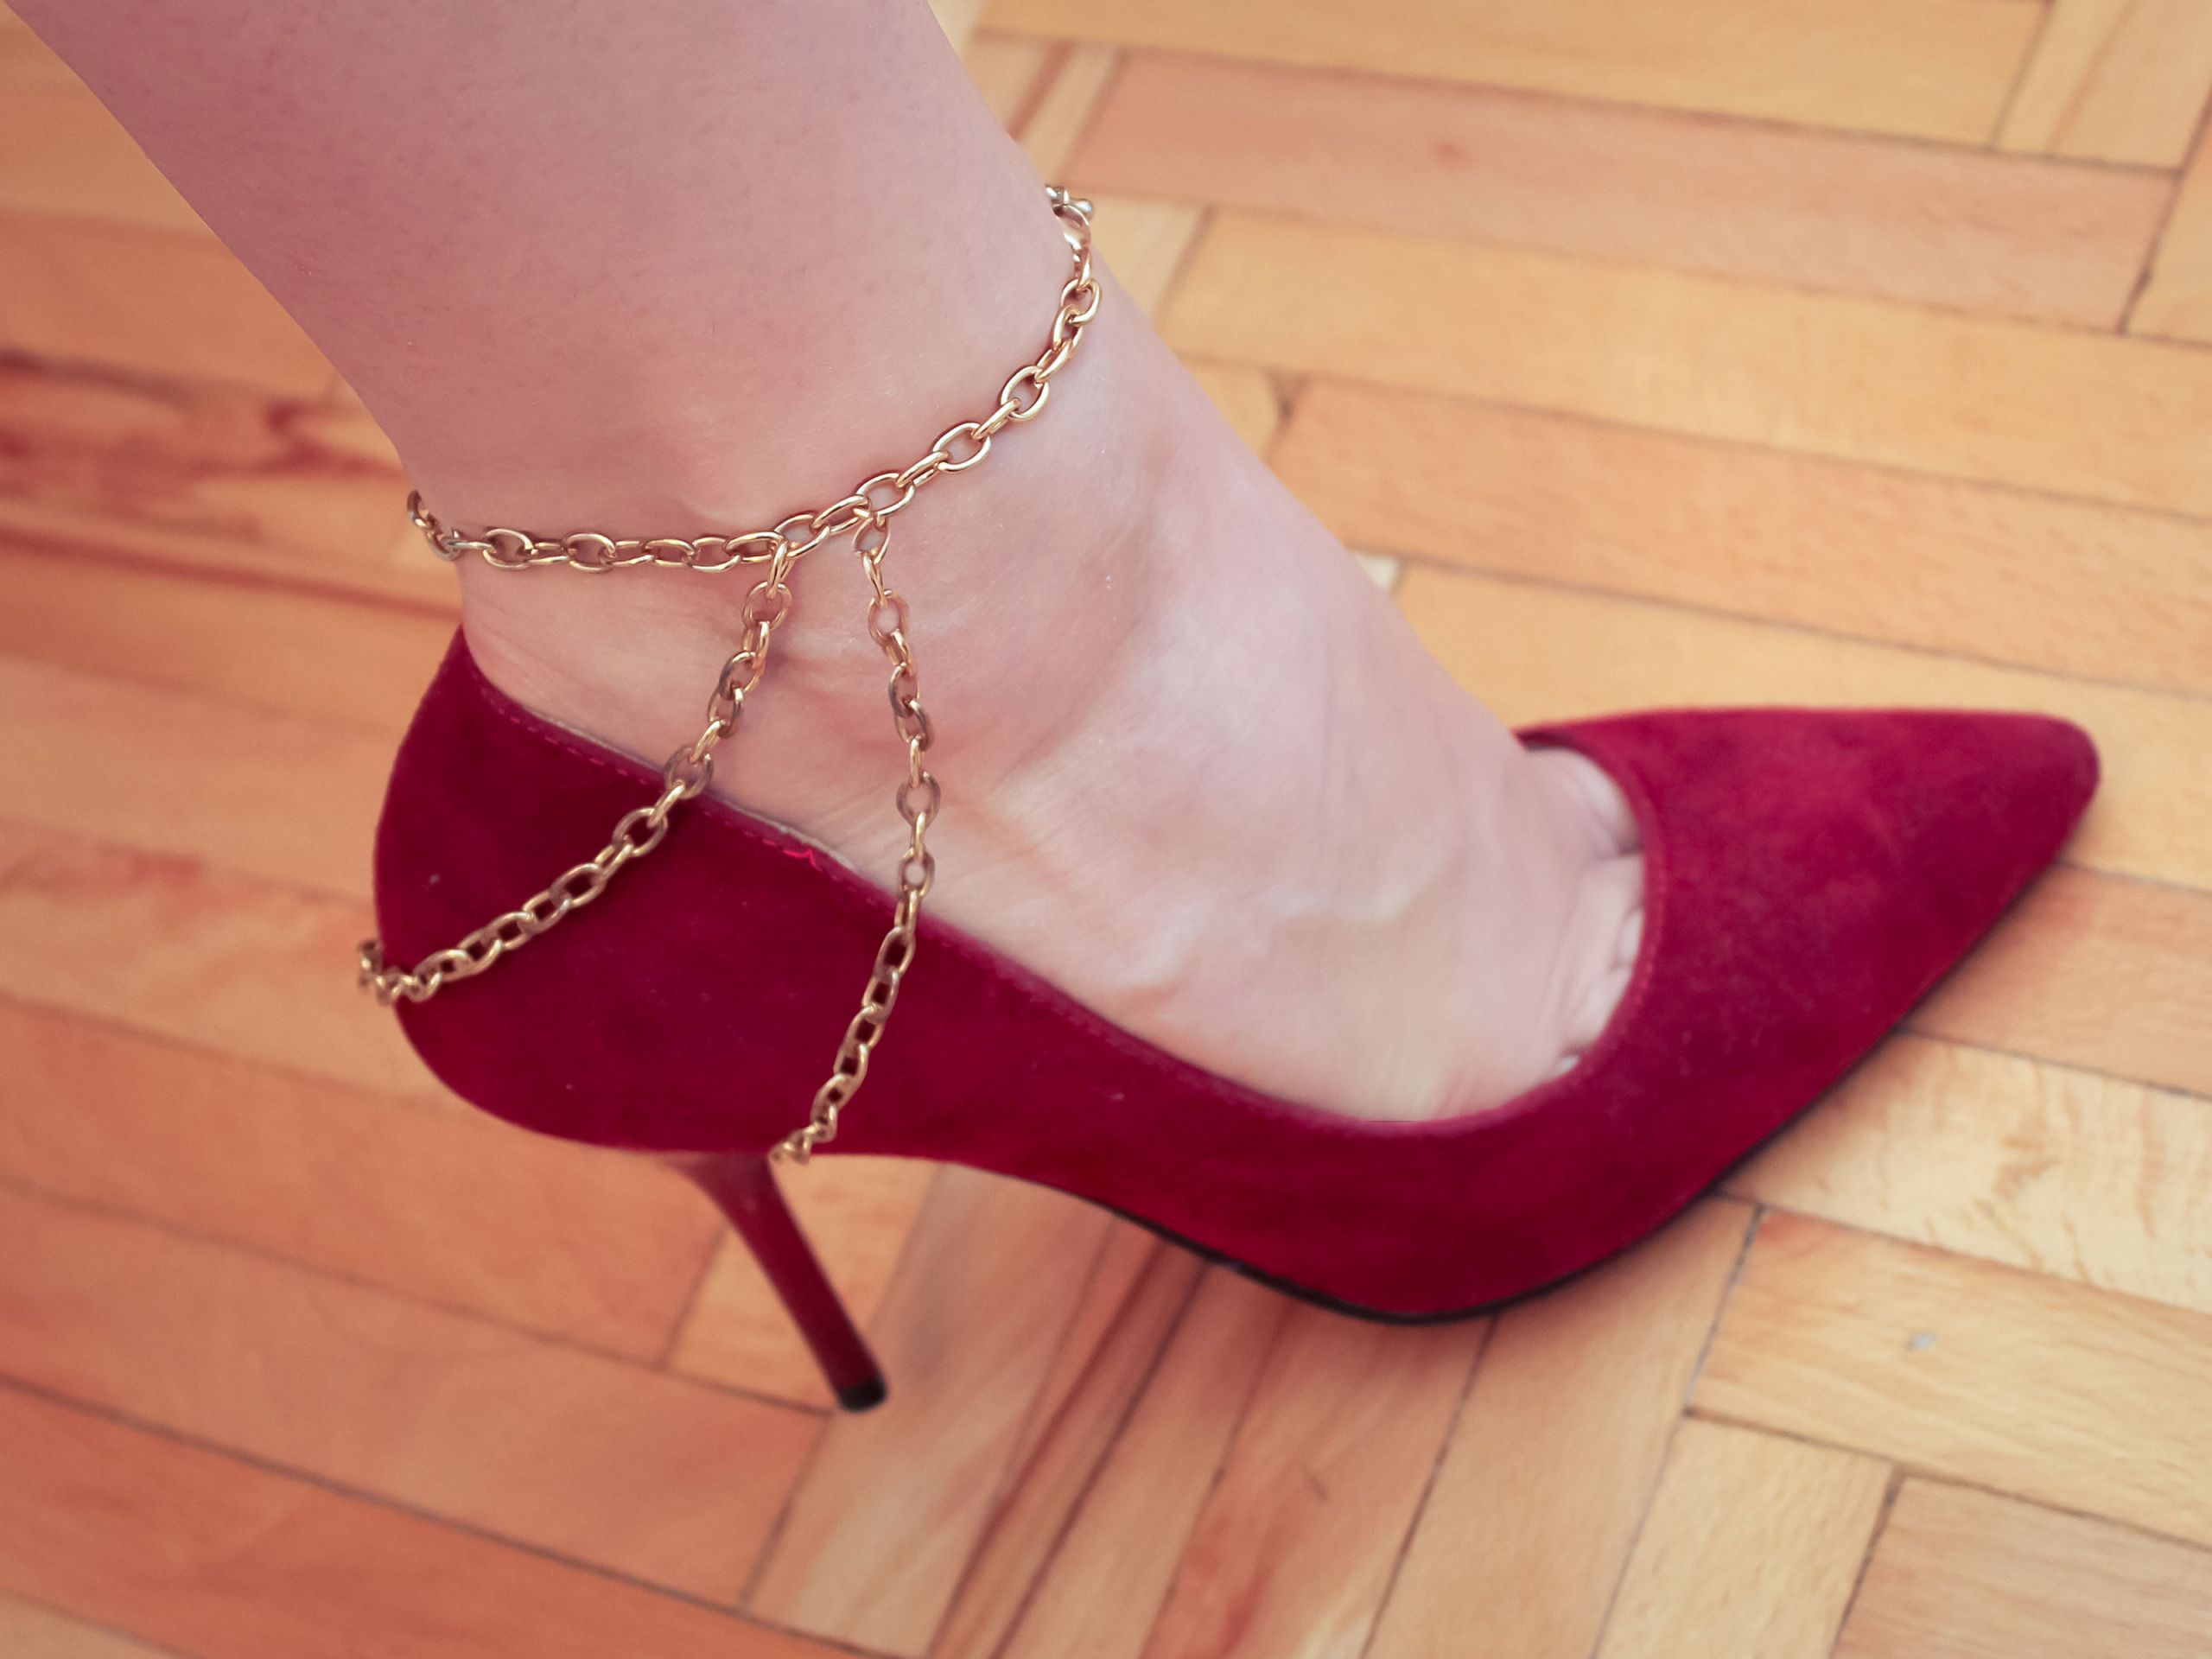 Anklet Anklette
 How to Make an Anklet with Draping Heel Chains 9 Steps